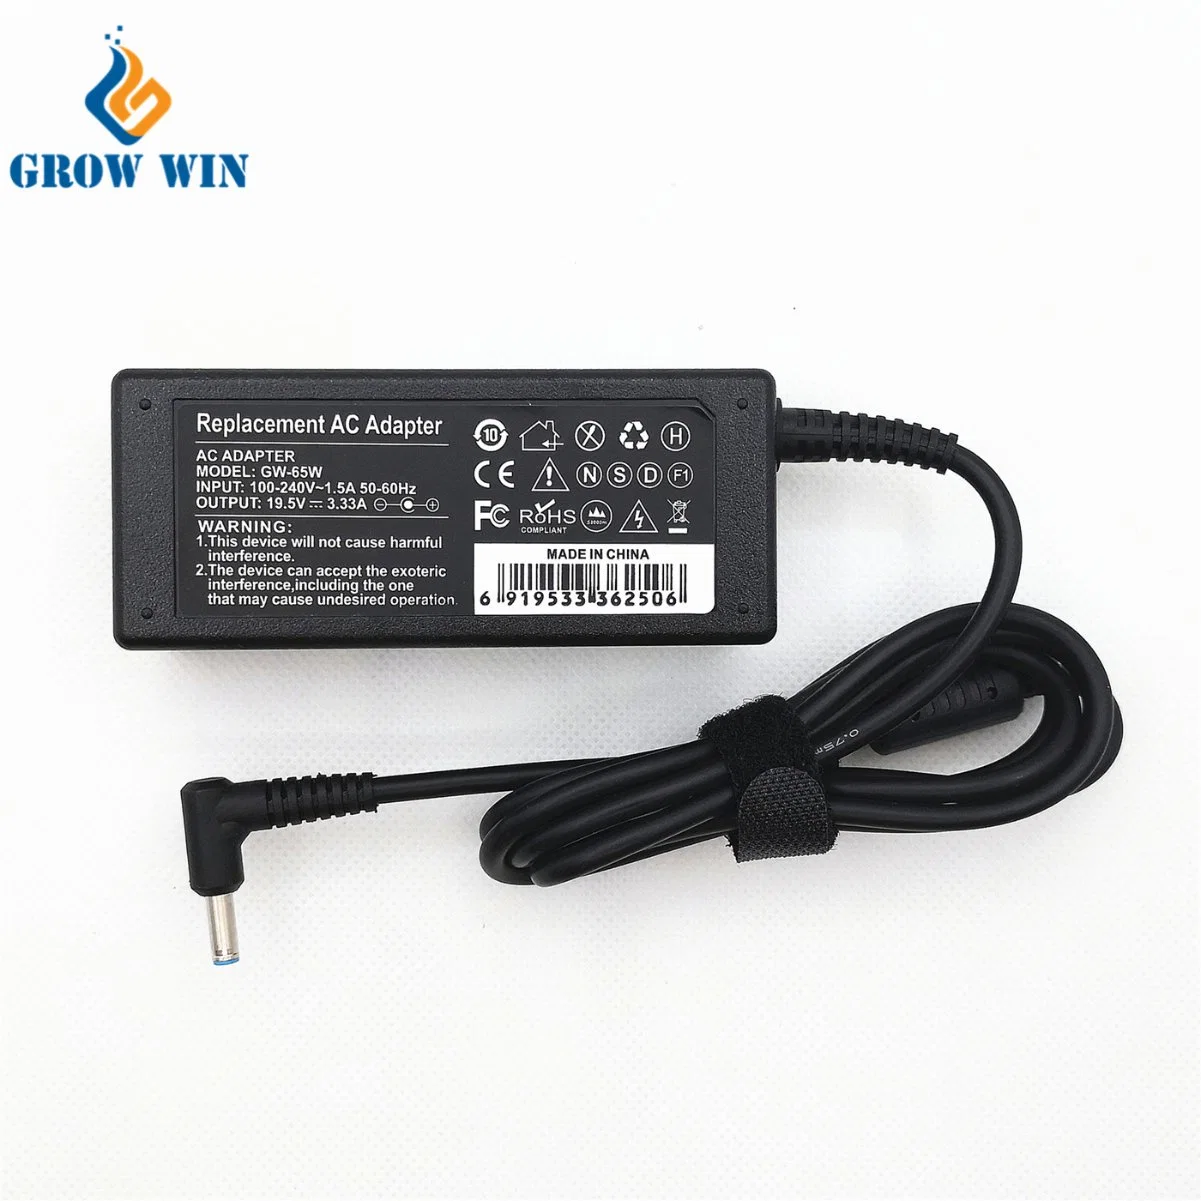 Growwin Laptop Battery Charger 19.5V 3.33A Power Adapter for HP